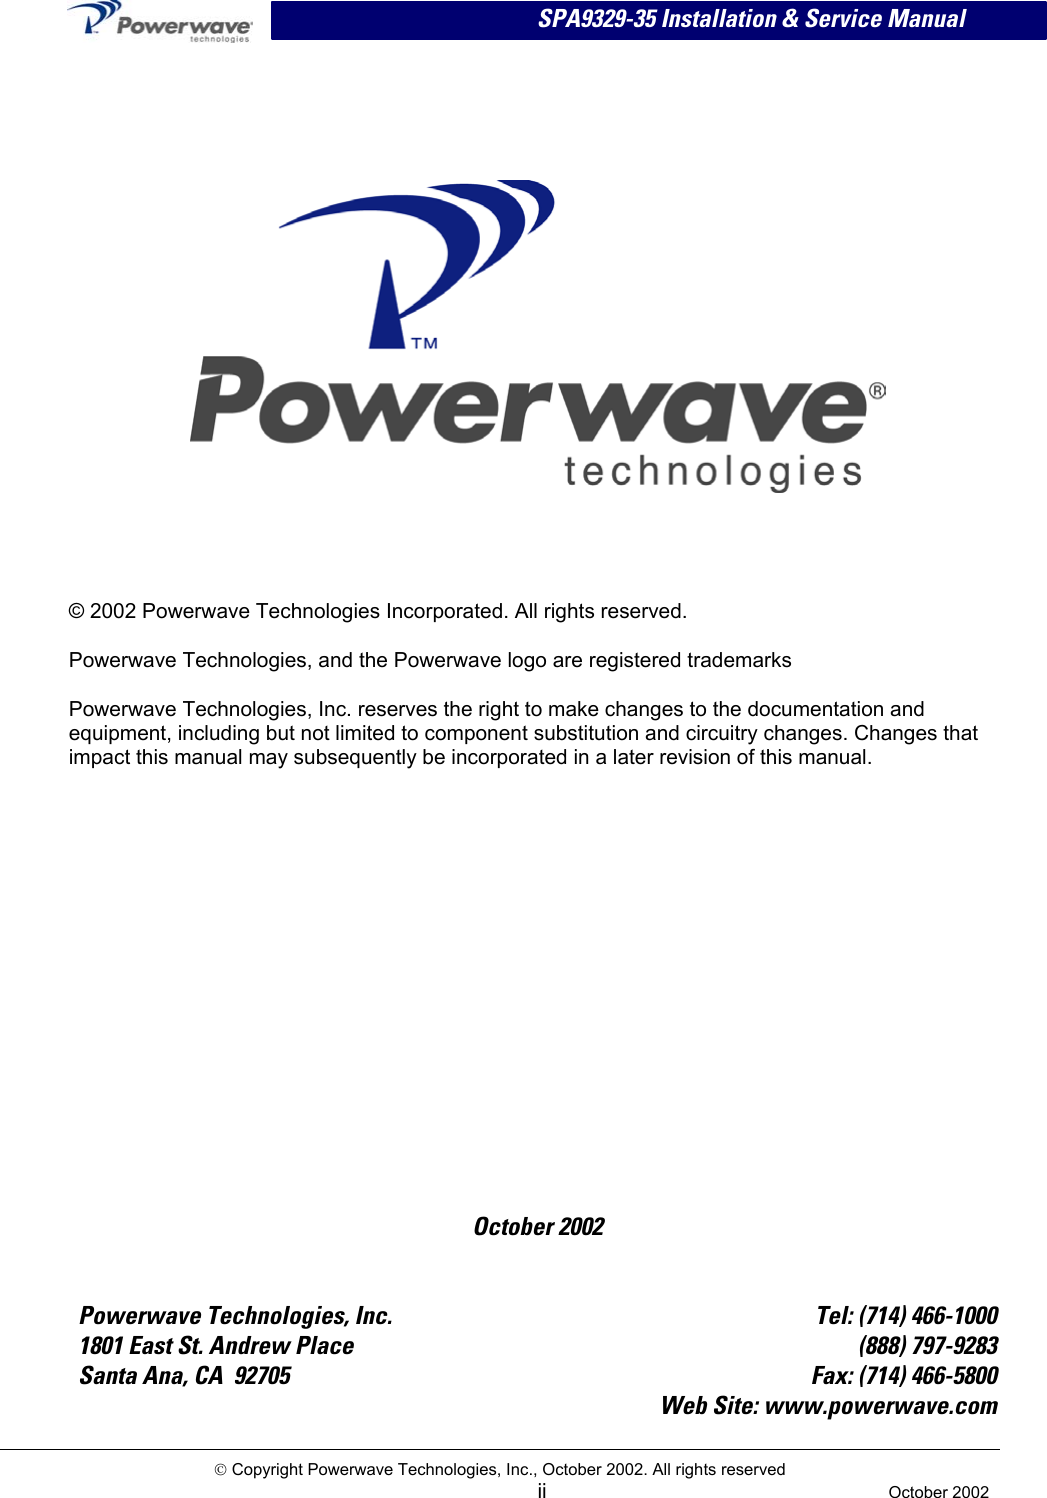  SPA9329-35 Installation &amp; Service Manual       October 2002 © 2002 Powerwave Technologies Incorporated. All rights reserved. Powerwave Technologies, and the Powerwave logo are registered trademarks Powerwave Technologies, Inc. reserves the right to make changes to the documentation and equipment, including but not limited to component substitution and circuitry changes. Changes that impact this manual may subsequently be incorporated in a later revision of this manual.   Powerwave Technologies, Inc.  Tel: (714) 466-1000 1801 East St. Andrew Place  (888) 797-9283 Santa Ana, CA  92705  Fax: (714) 466-5800   Web Site: www.powerwave.com  Copyright Powerwave Technologies, Inc., October 2002. All rights reserved  ii  October 2002  